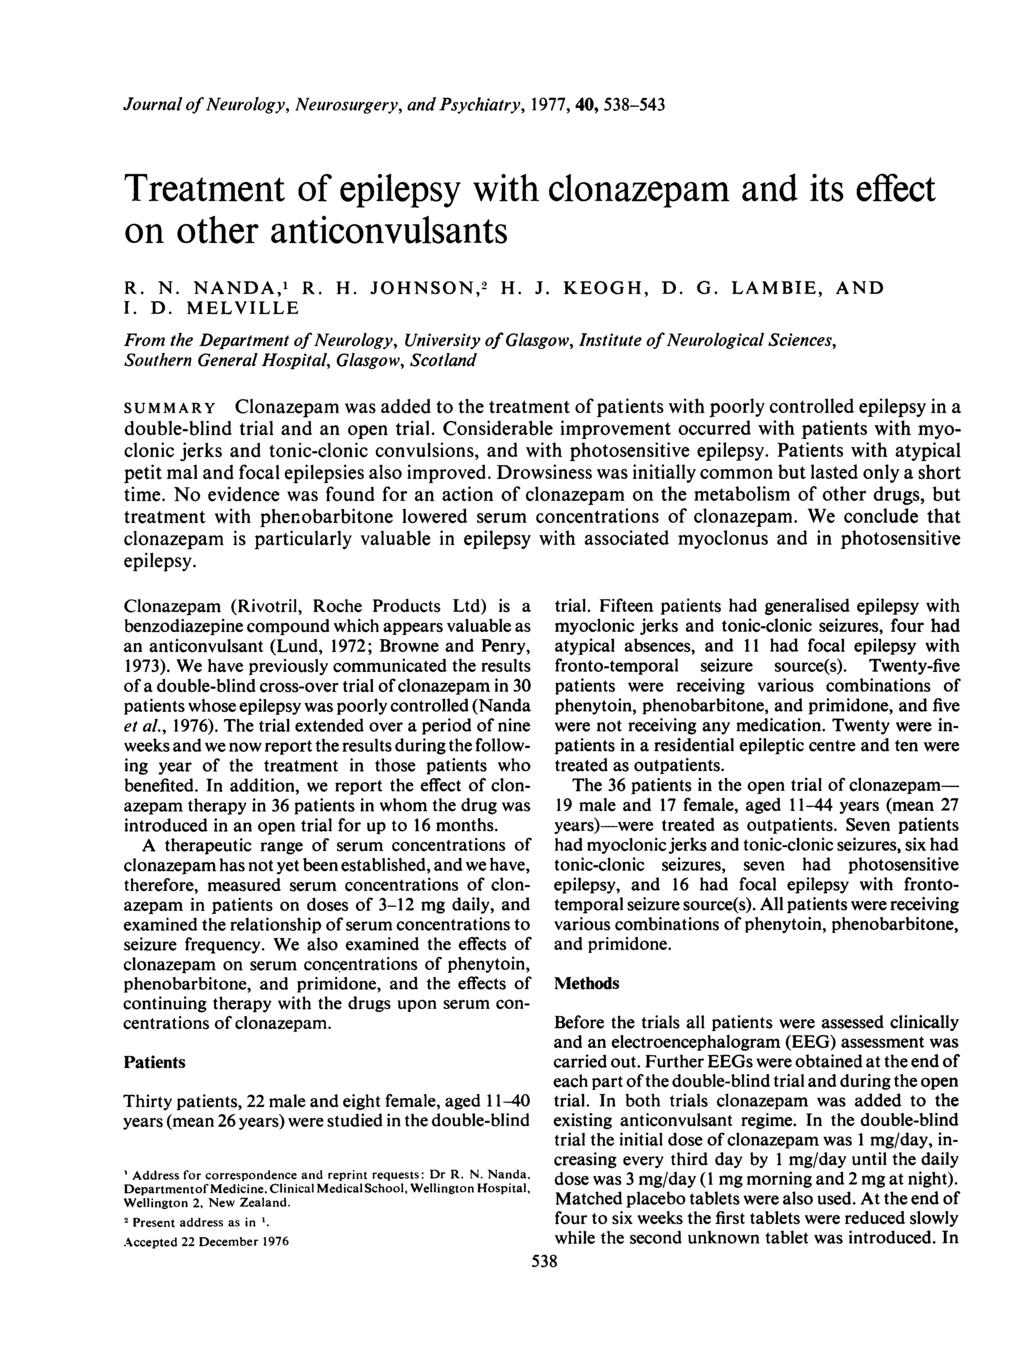 Journal of Neurology, Neurosurgery, and Psychiatry, 1977, 4, 538-543 Treatment of epilepsy with clonazepam and its effect on other anticonvulsants R. N. NANDA,1 R. H. JOHNSON,2 H. J. KEOGH, D. G.